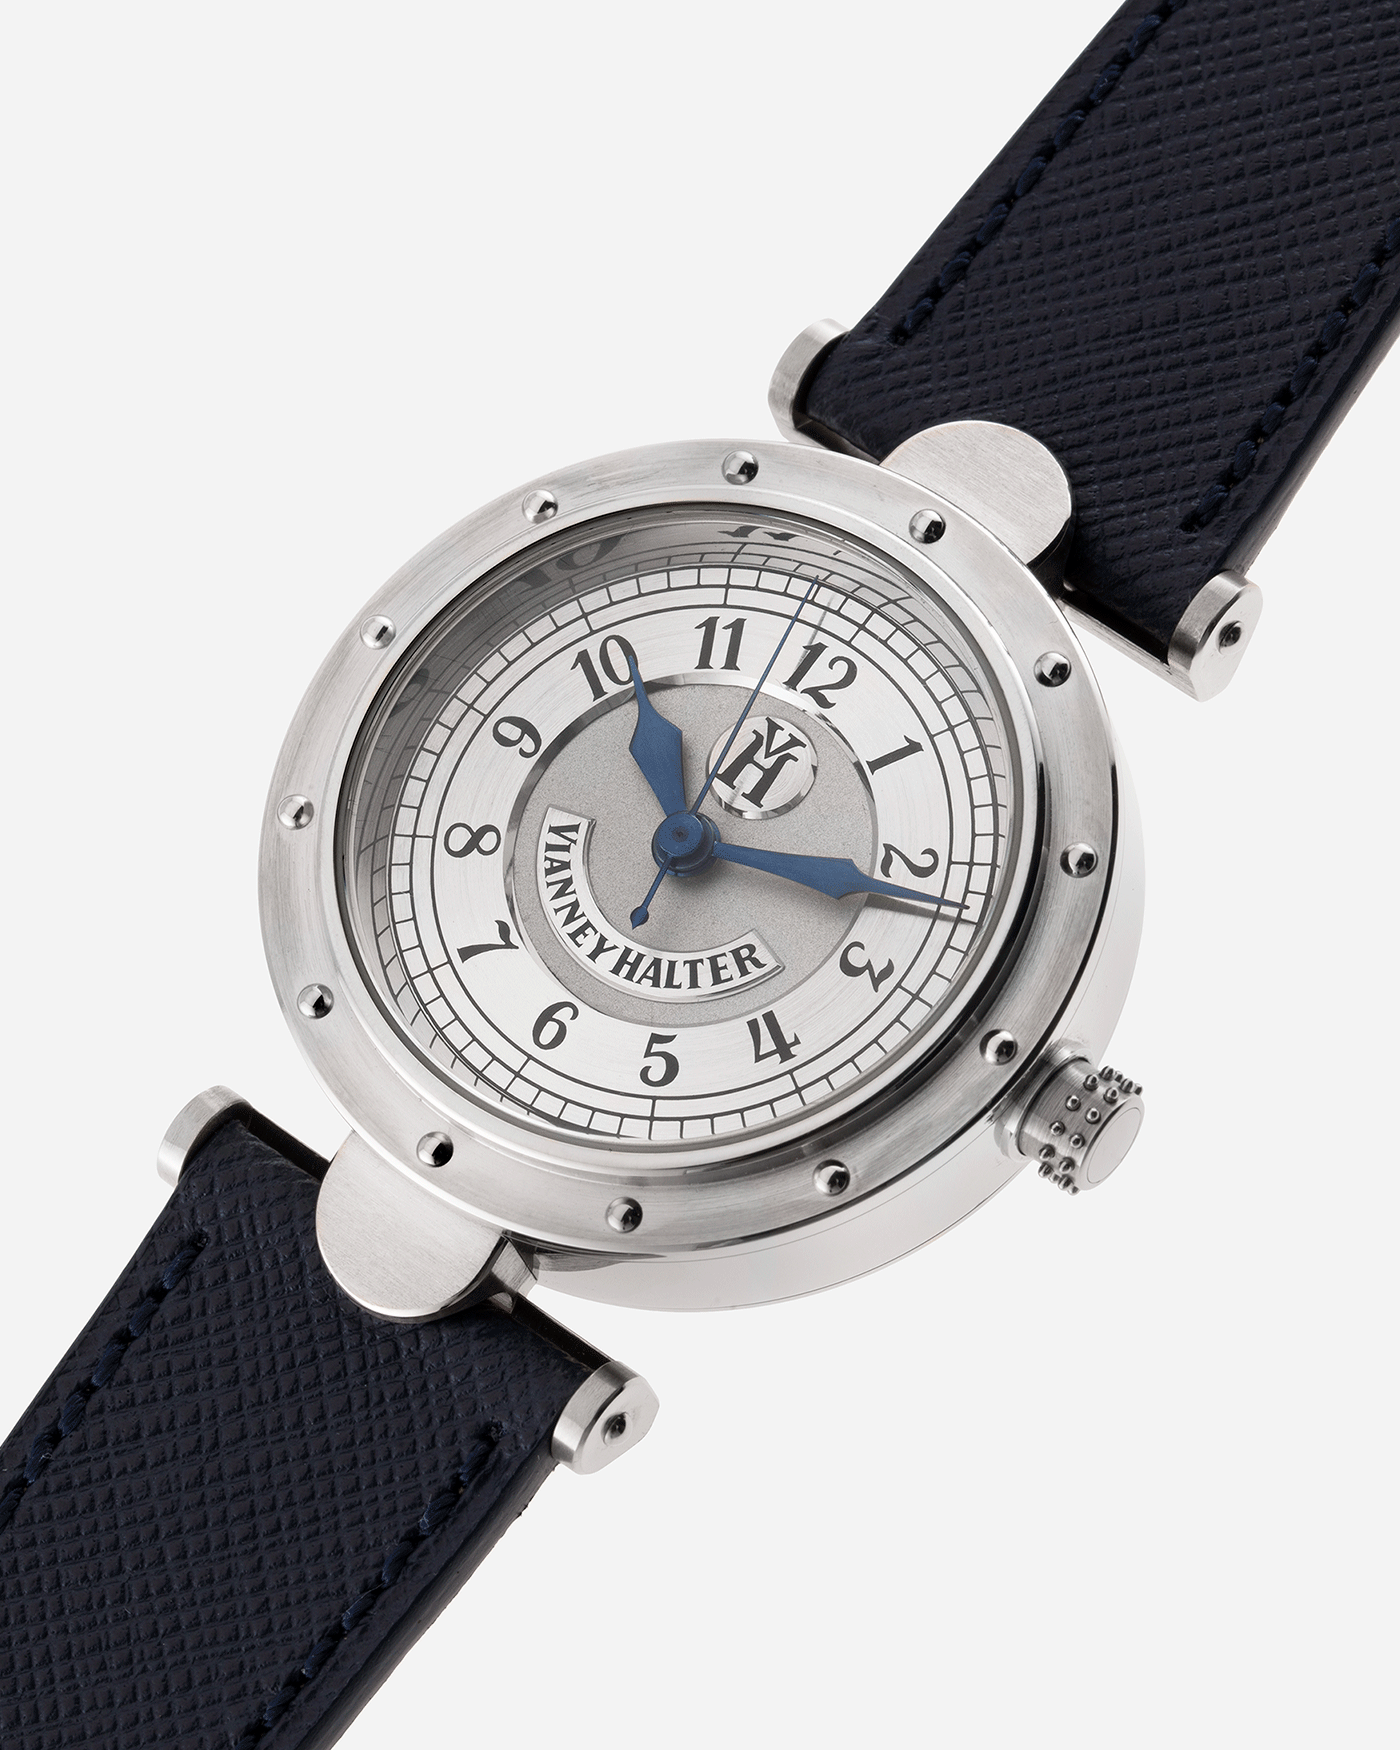 Brand: Vianney Halter Year: 2000’s Model: Classic Material: 18k White Gold Movement: Modified Lemania 8810 with mystery motor Case Diameter: 36mm Bracelet/Strap: Vianney Halter Black Alligator with matching White Gold Buckle and Navy Blue Molequin Textured Calf